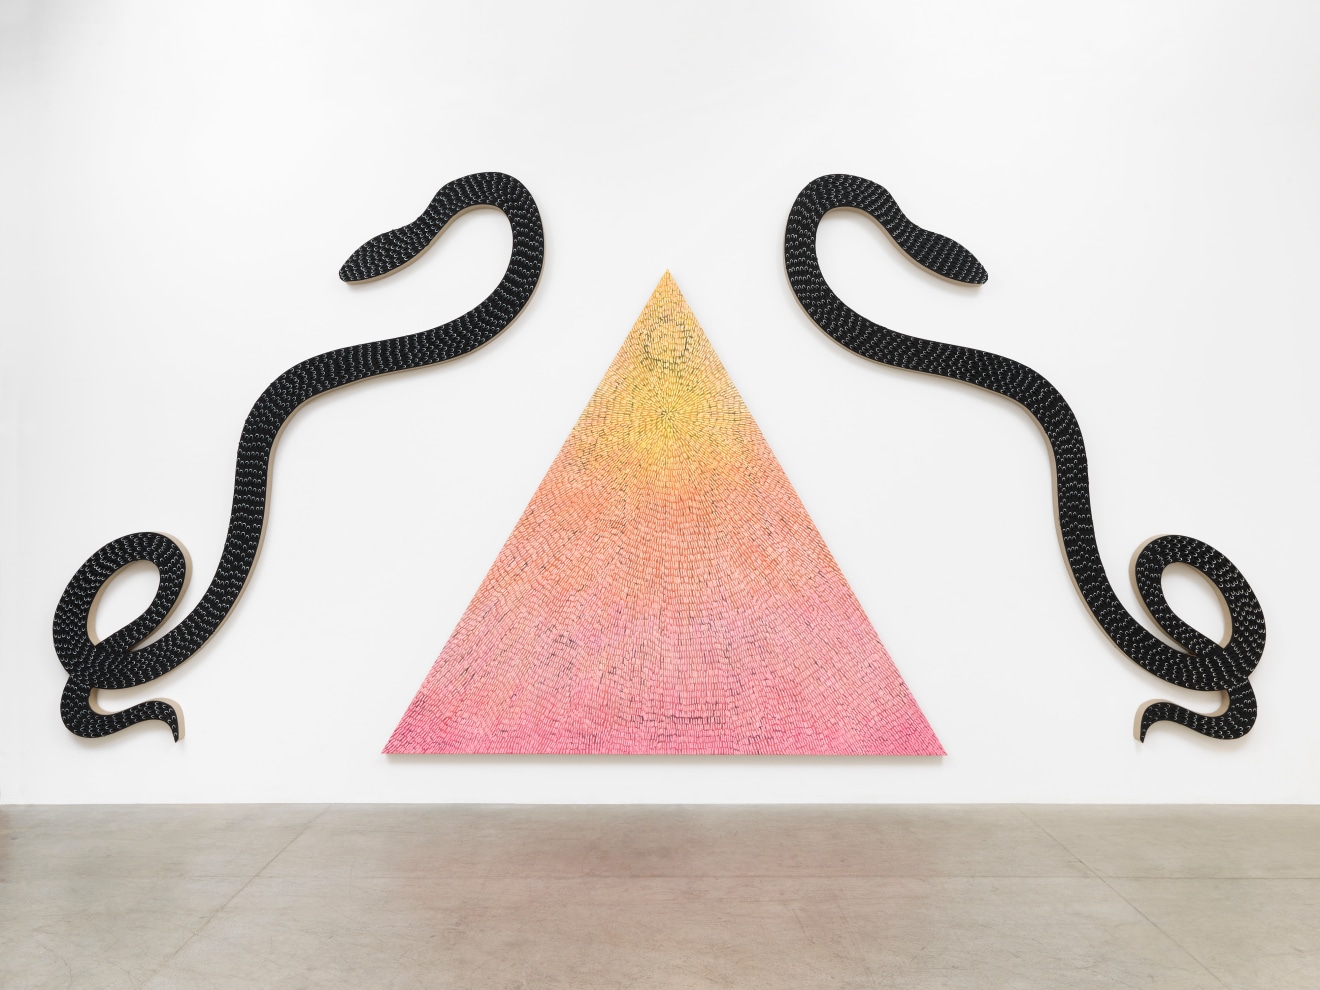 Jennifer Guidi, Guardians of Light (Triptych: Painted Universe Mandala Triangle SF #2T, Yellow to Pink Gradient, Natural Ground; White #2PT, Black Sand SF #1S, Black Ground; White #3PT, Black Sand SF #2S, Black Ground), 2018 - 2019